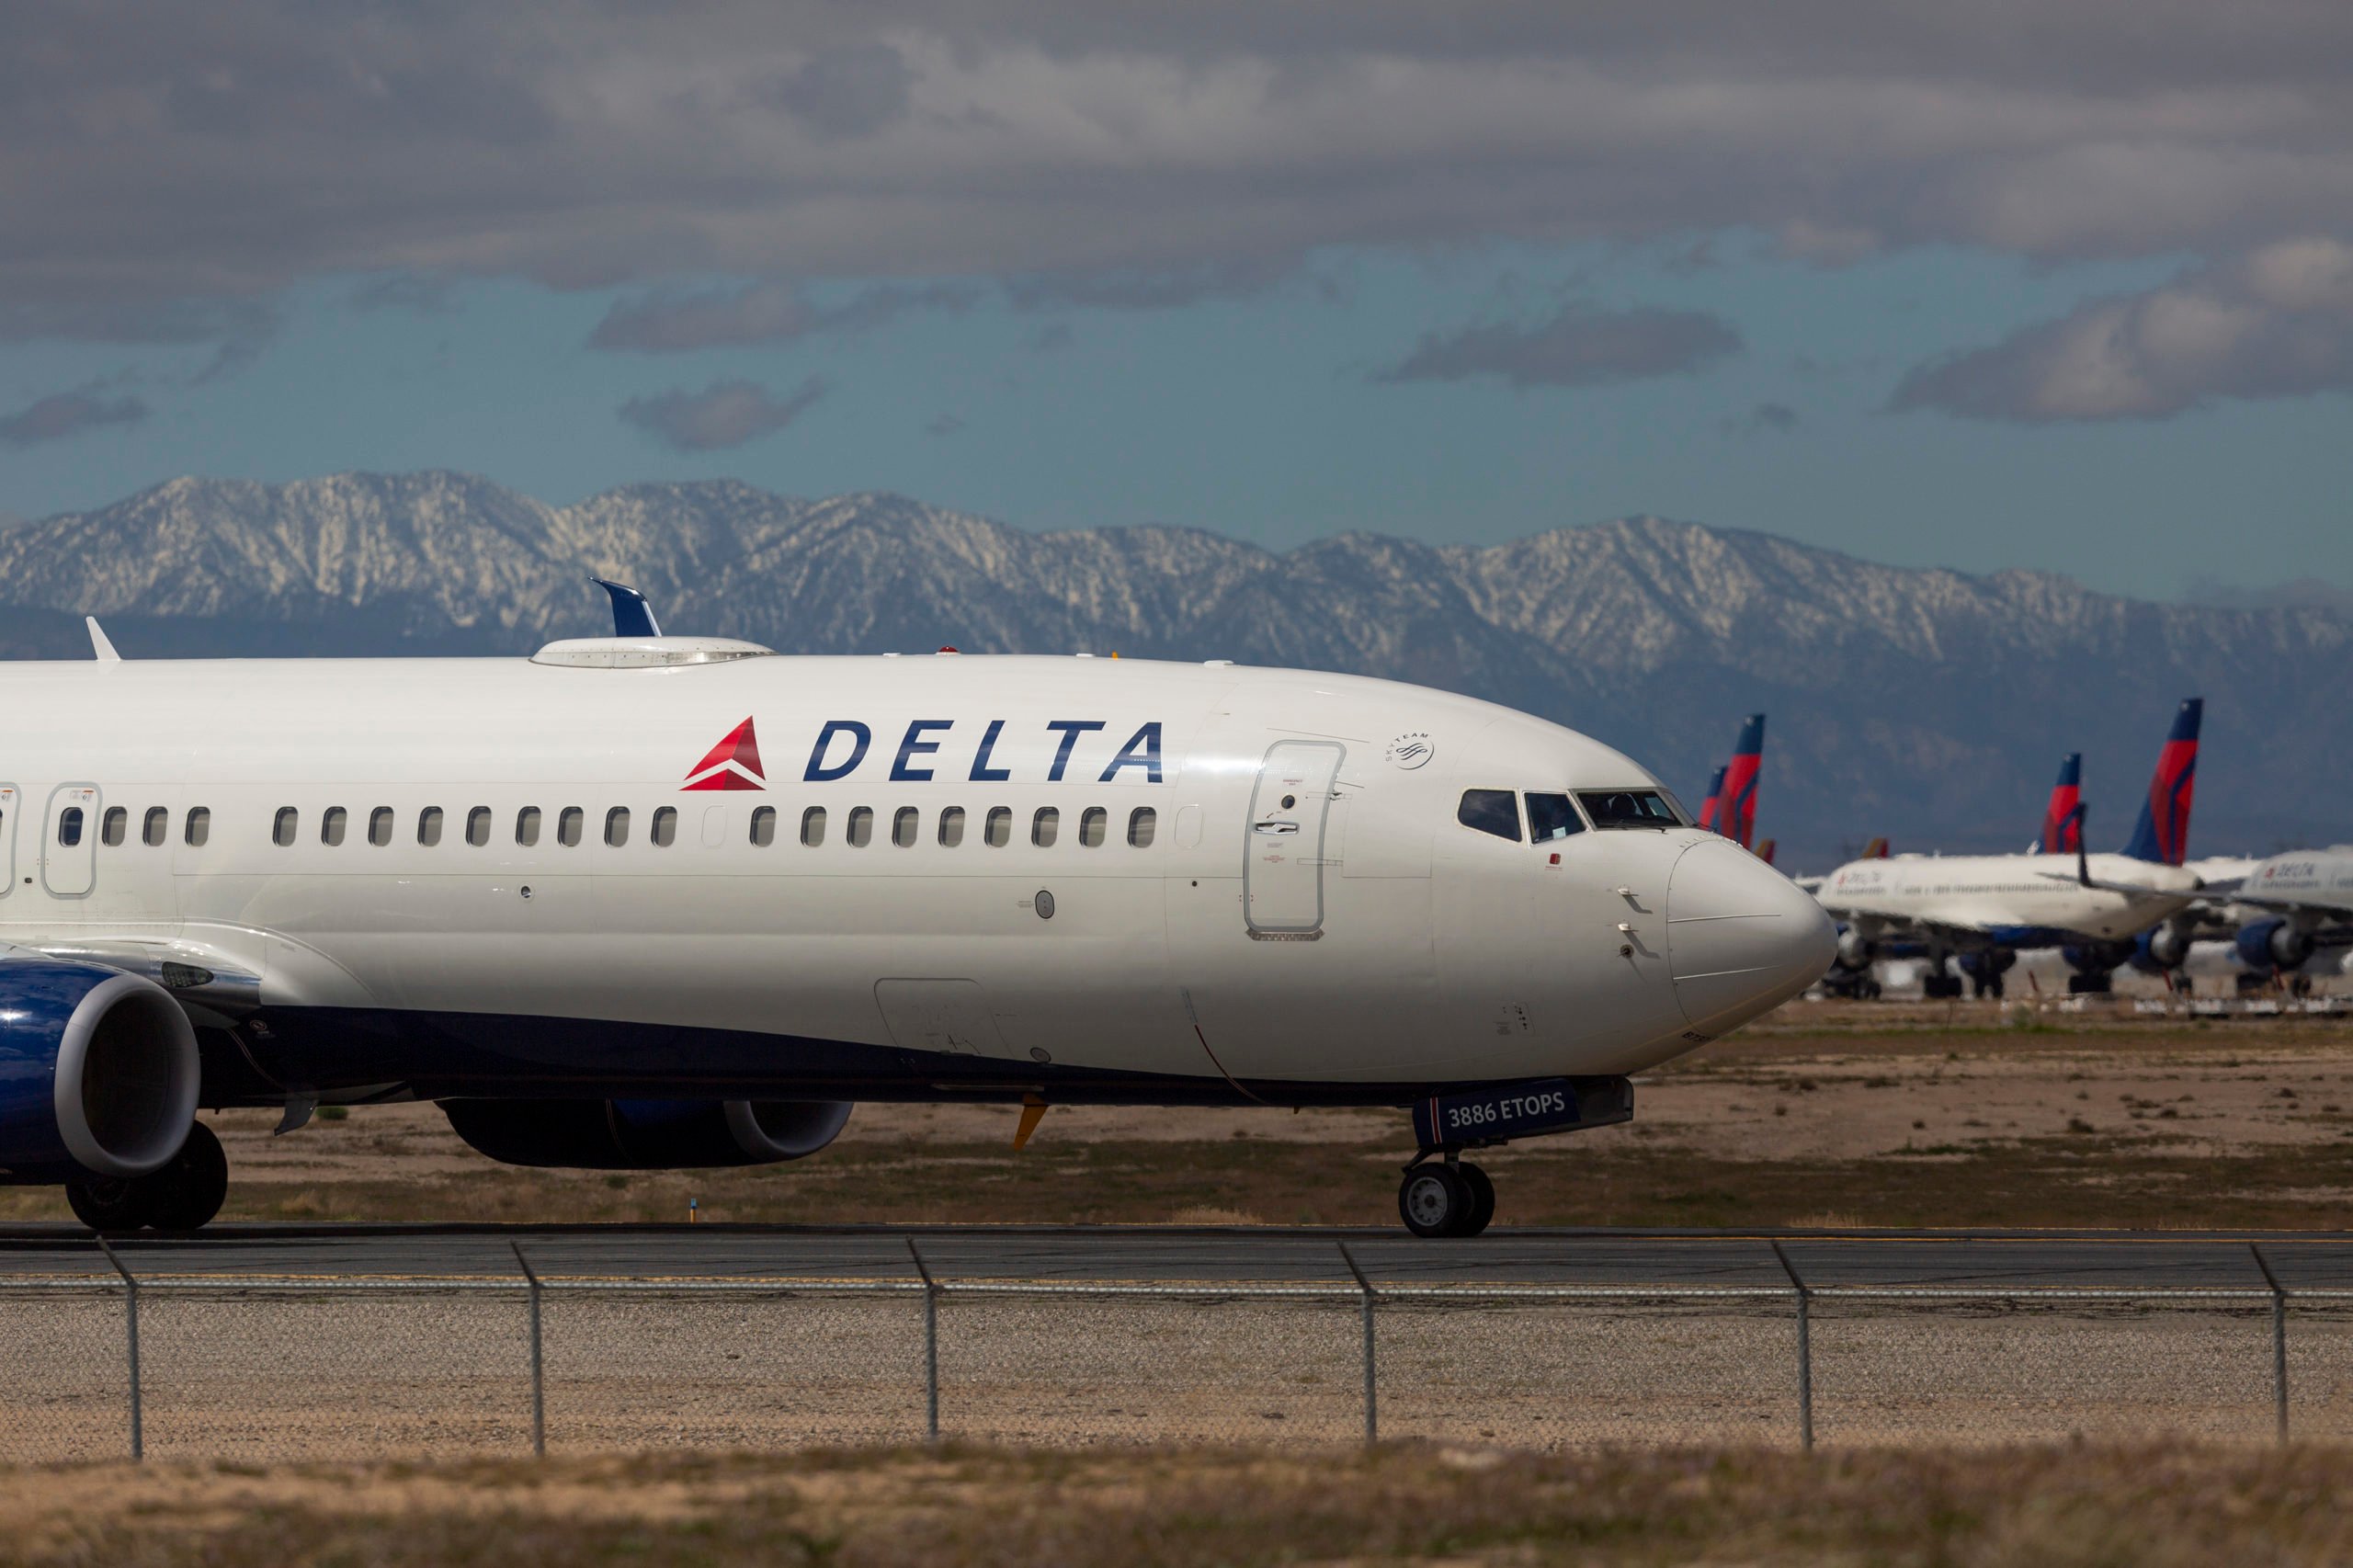 VICTORVILLE, CA - MARCH 24: A Delta Air Lines jet taxis to be parked with a growing number of jets at Southern California Logistics Airport (SCLA) on March 24, 2020 in Victorville, California. As the coronavirus pandemic grows, exponentially increasing travel restrictions and the numbers of people in quarantine, airlines around the world are scrambling to find places to park a majority of their fleet as they wait to see how the situation will play out. (Photo by David McNew/Getty Images)